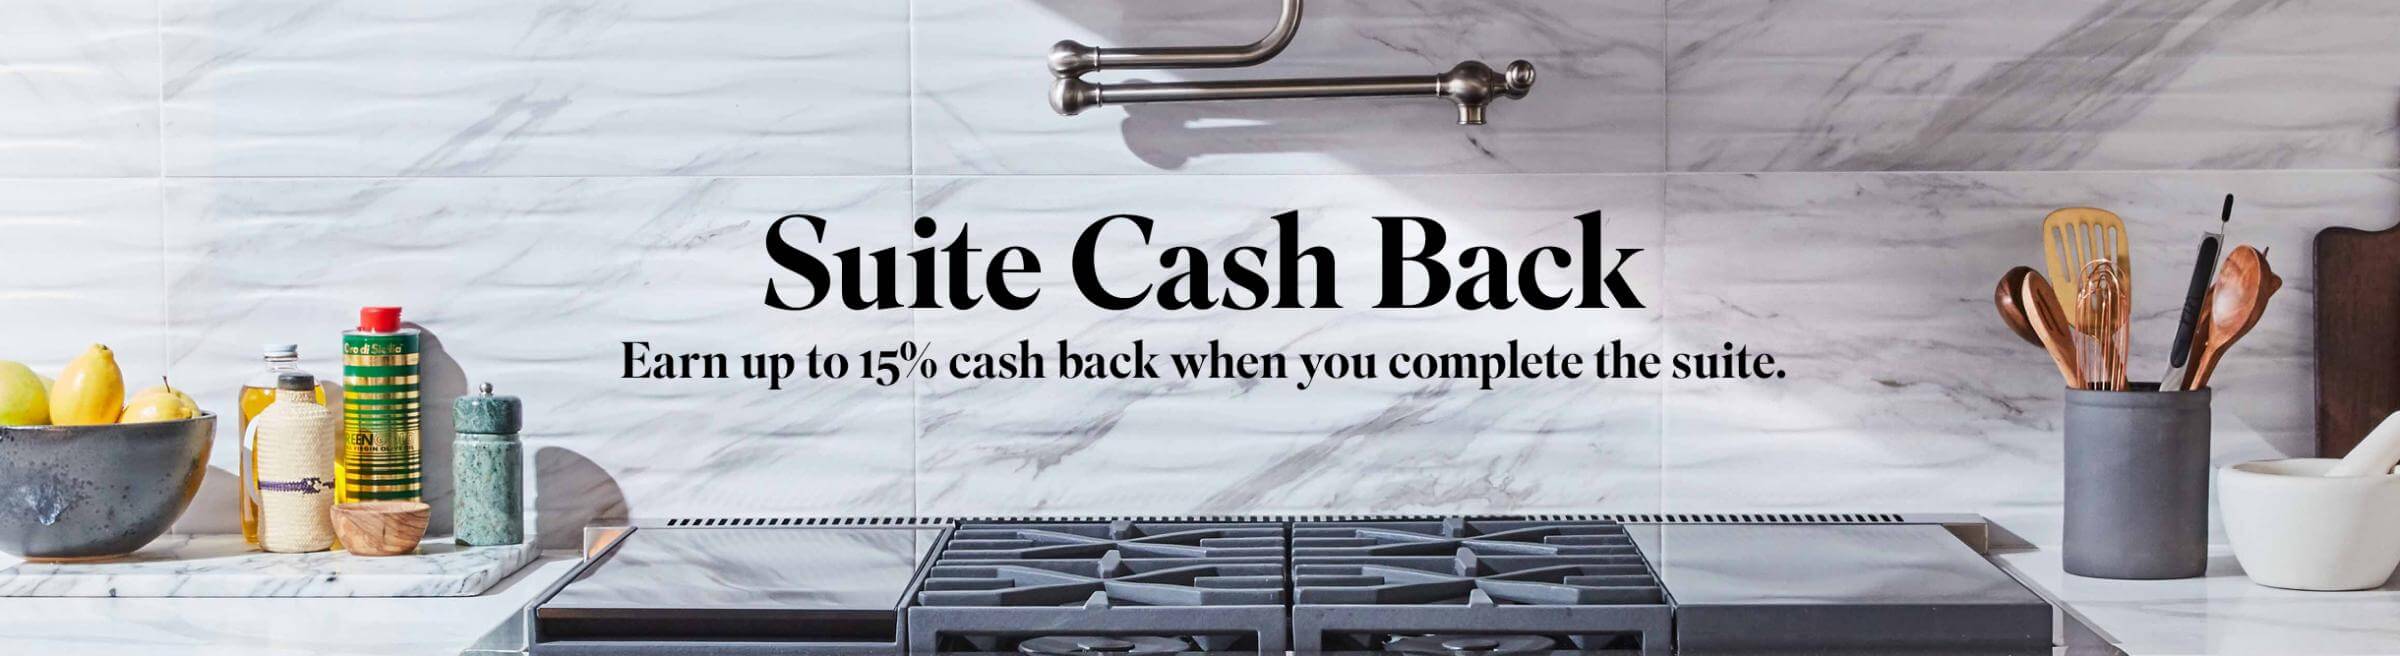 Suite Cash Back promo. Earn up to 15% cash back when you complete the suite. 